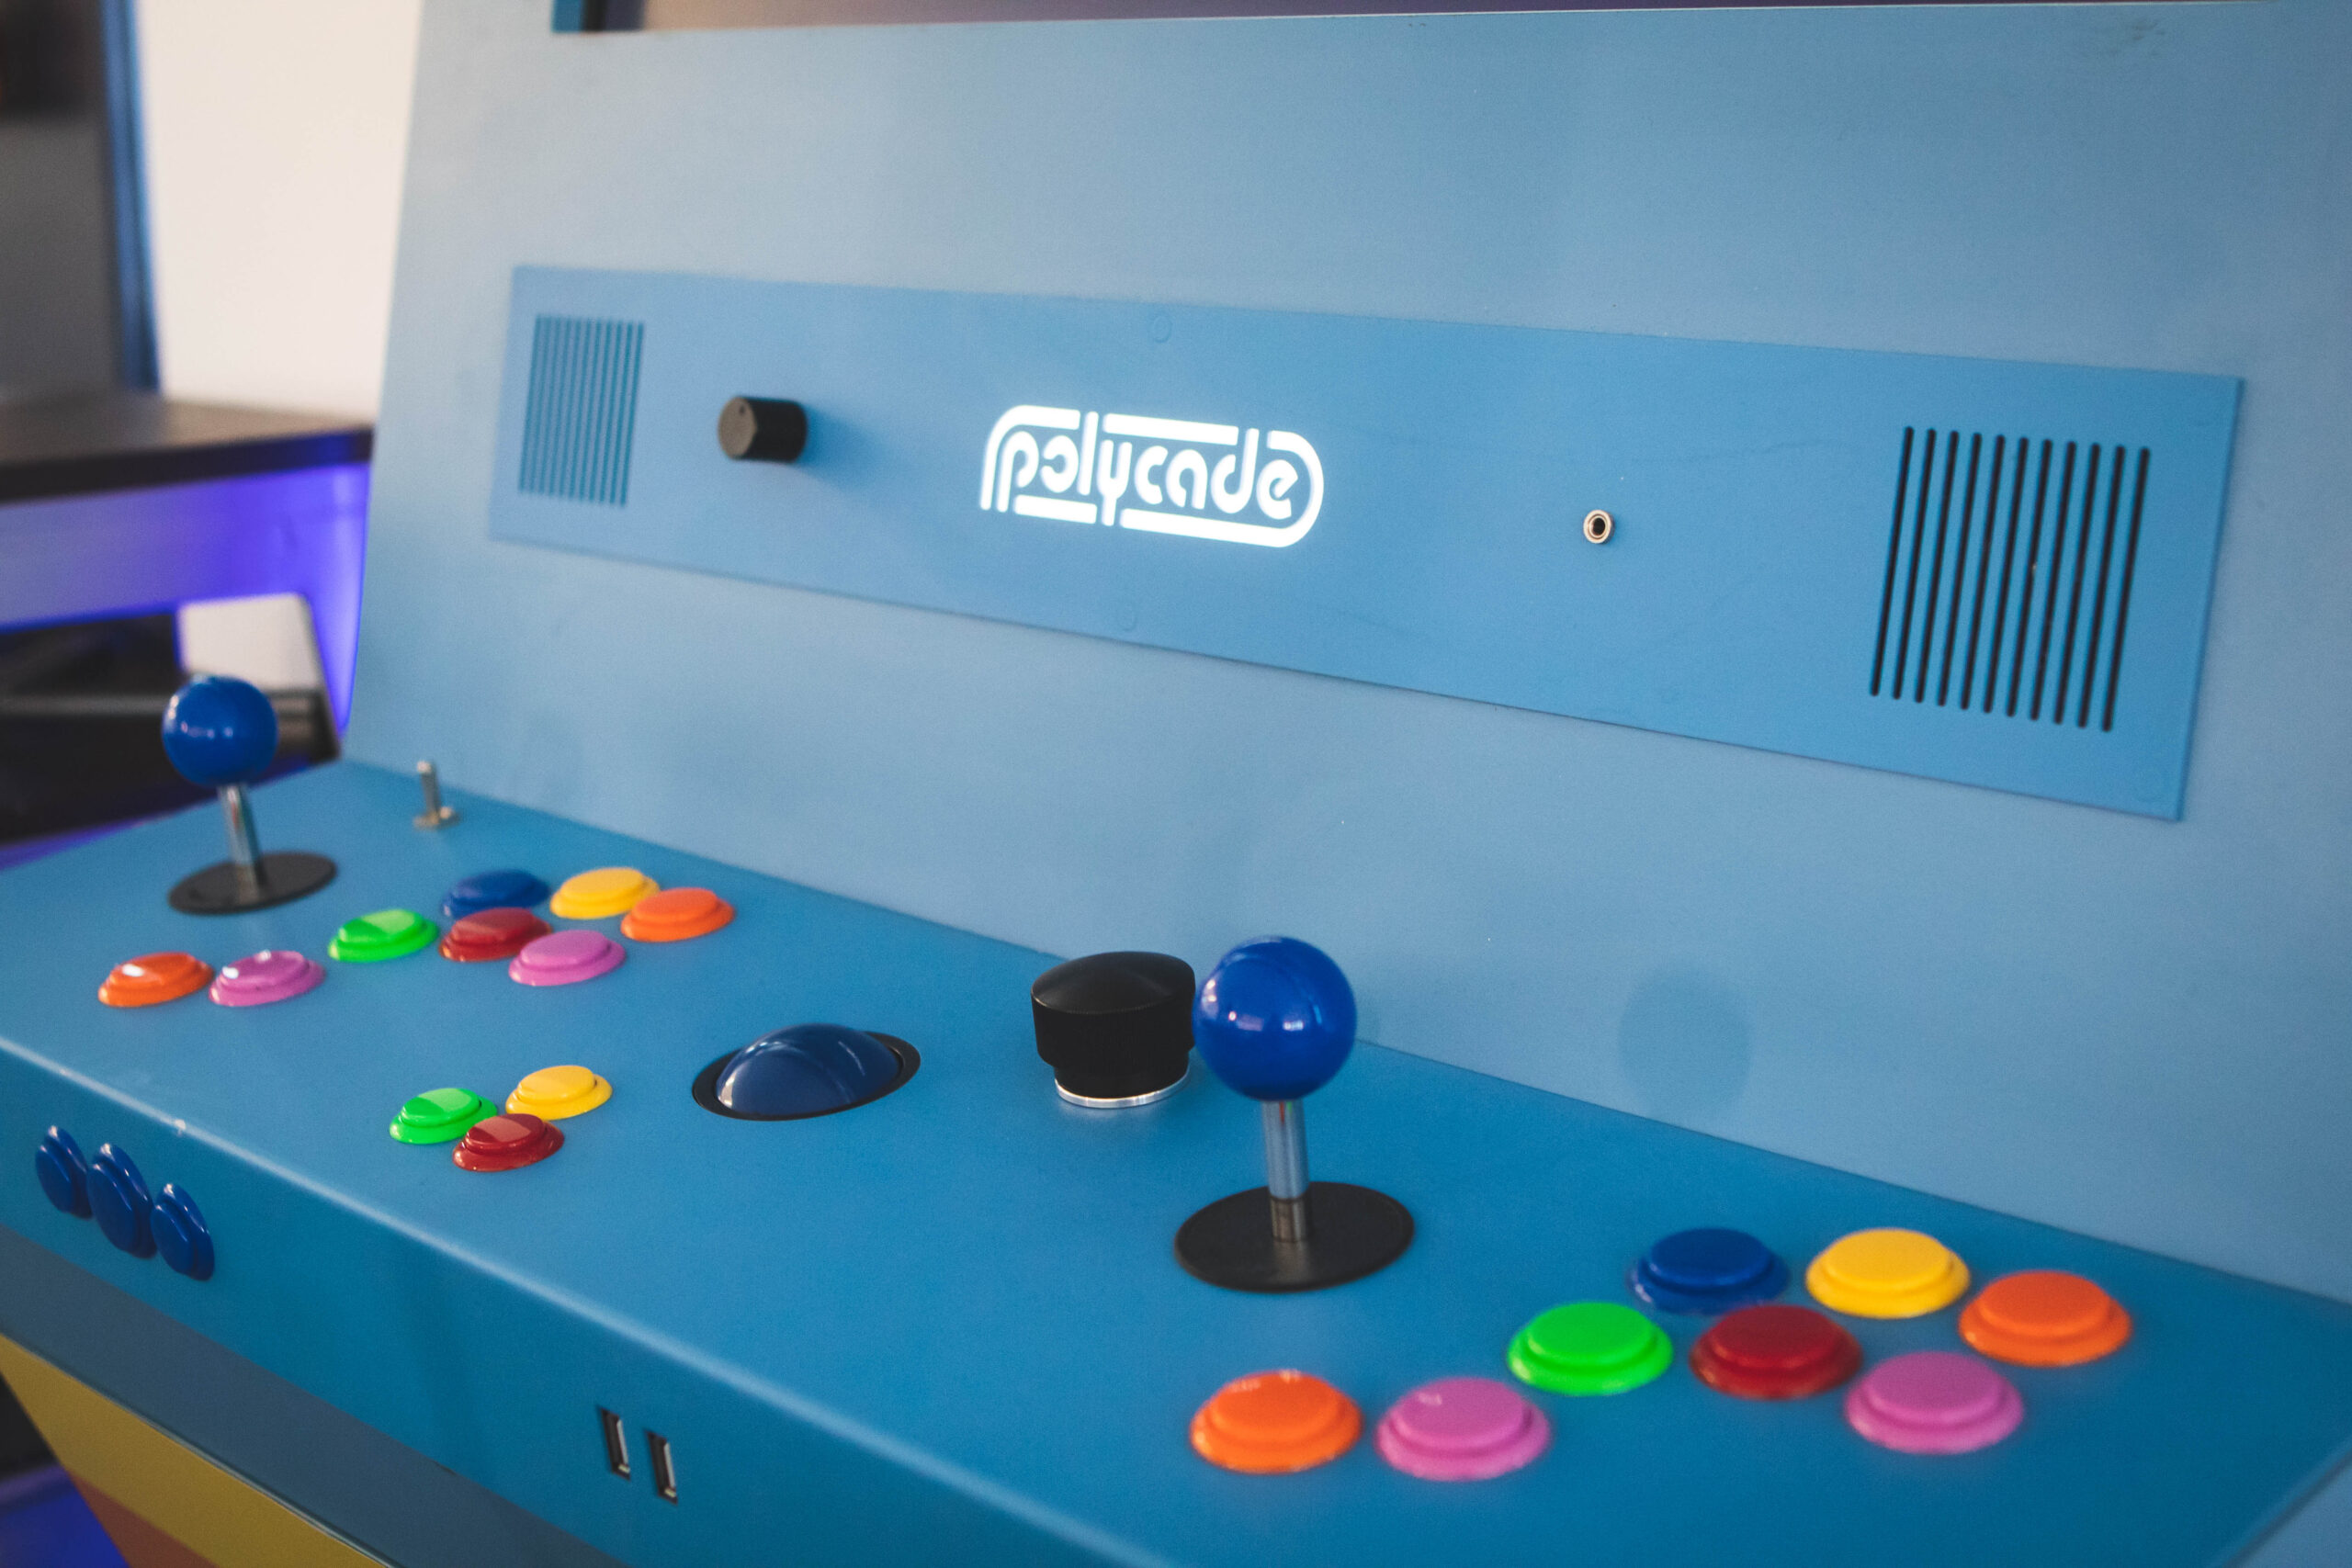 Closeup picture of blue Polycade arcade game with light blue dashboard, colorful buttons and black joysticks.